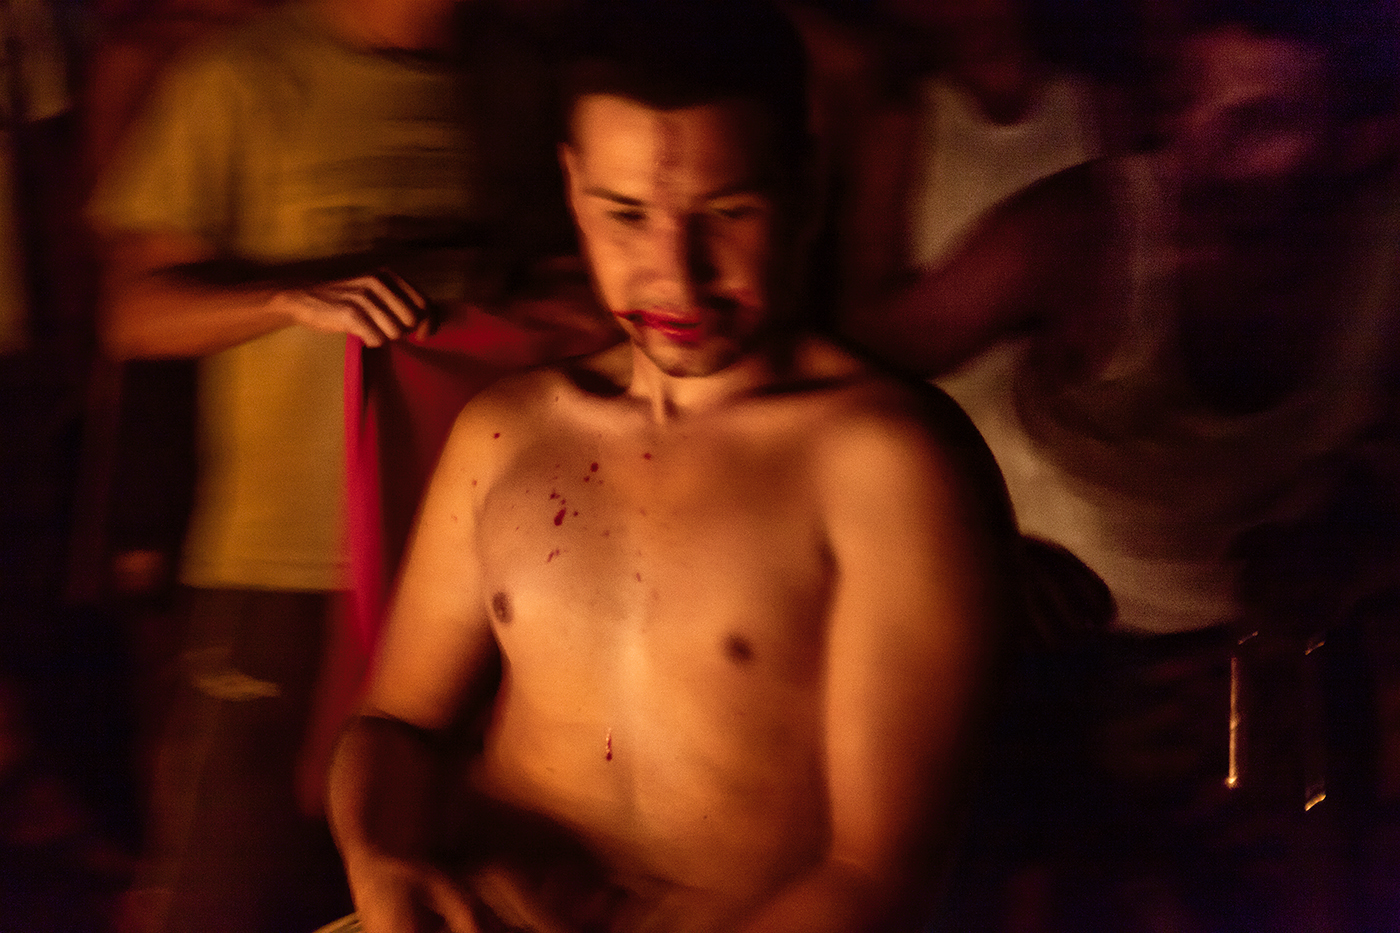 Andres Solanzano drips with the blood of a viking whose spirit now inhabits his body.  The power of the vikings may be conveyed to others through the physical trial Andres has now endured by his own self-mutilation.  Marialionceras believe that blood is the lifeforce of the universe.  Its vital power flows through everything.